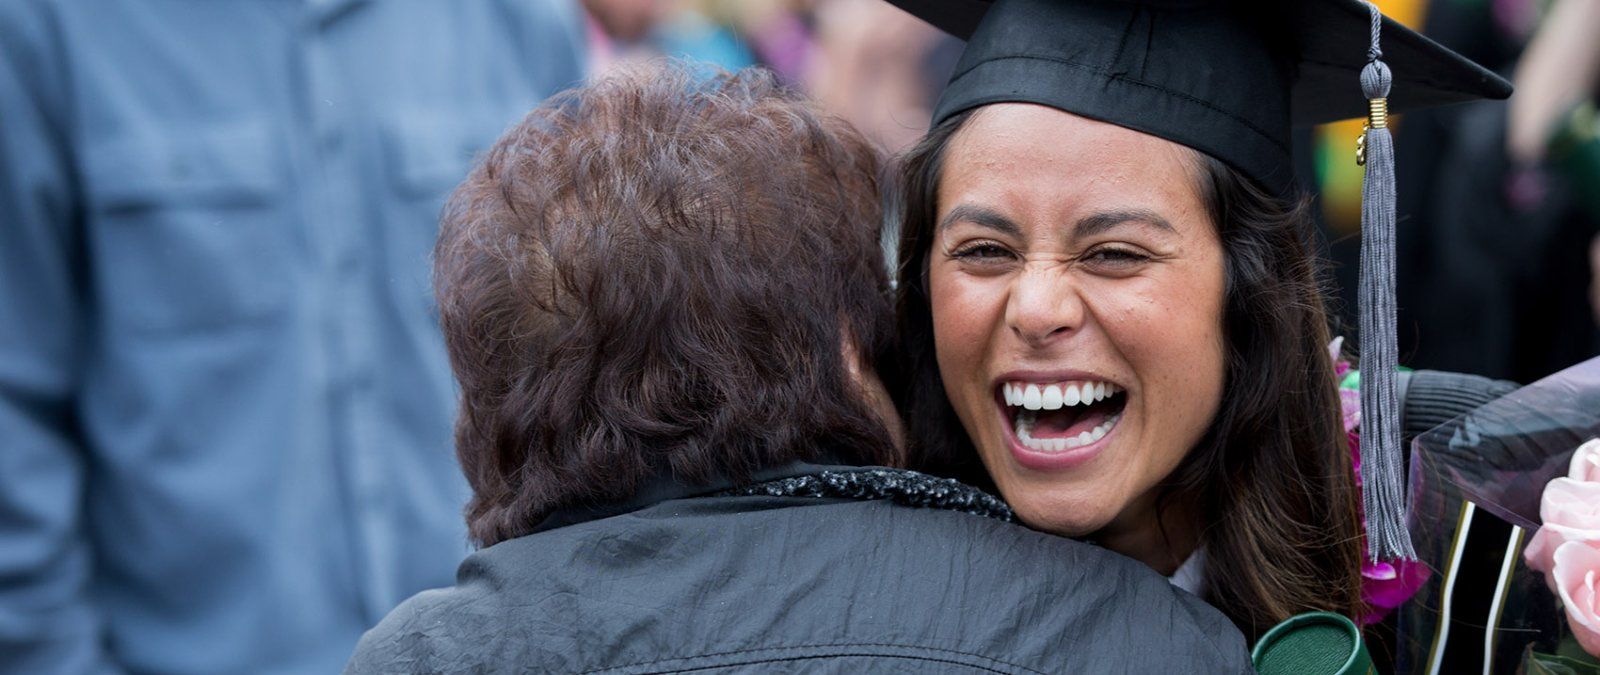 A 69 graduate student is embraced by a grandparent after commencement.